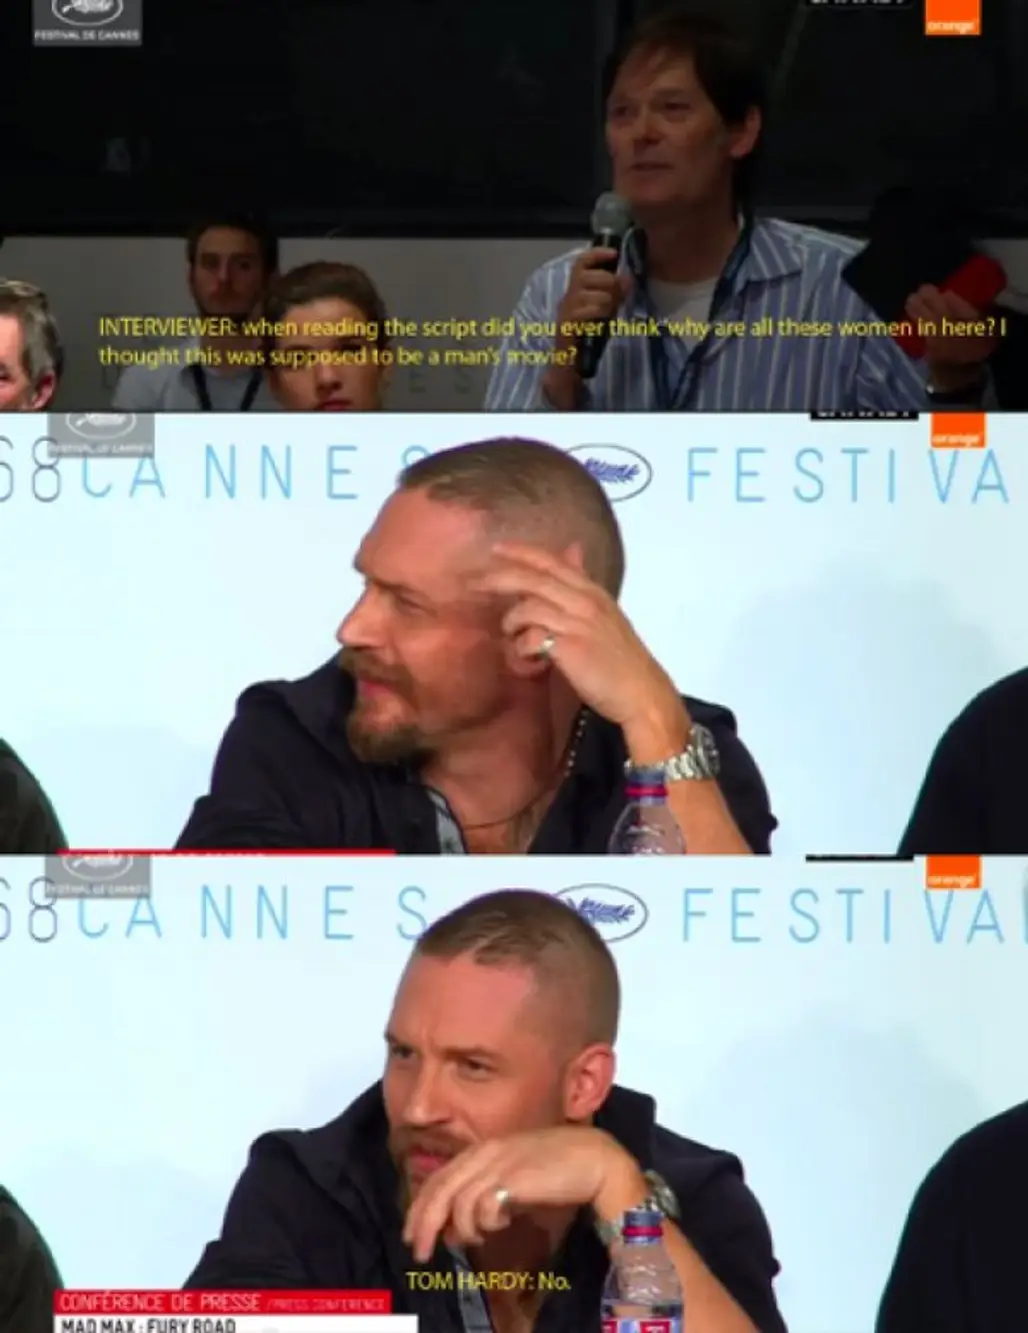 When Tom Hardy's Expression Said More than Words...